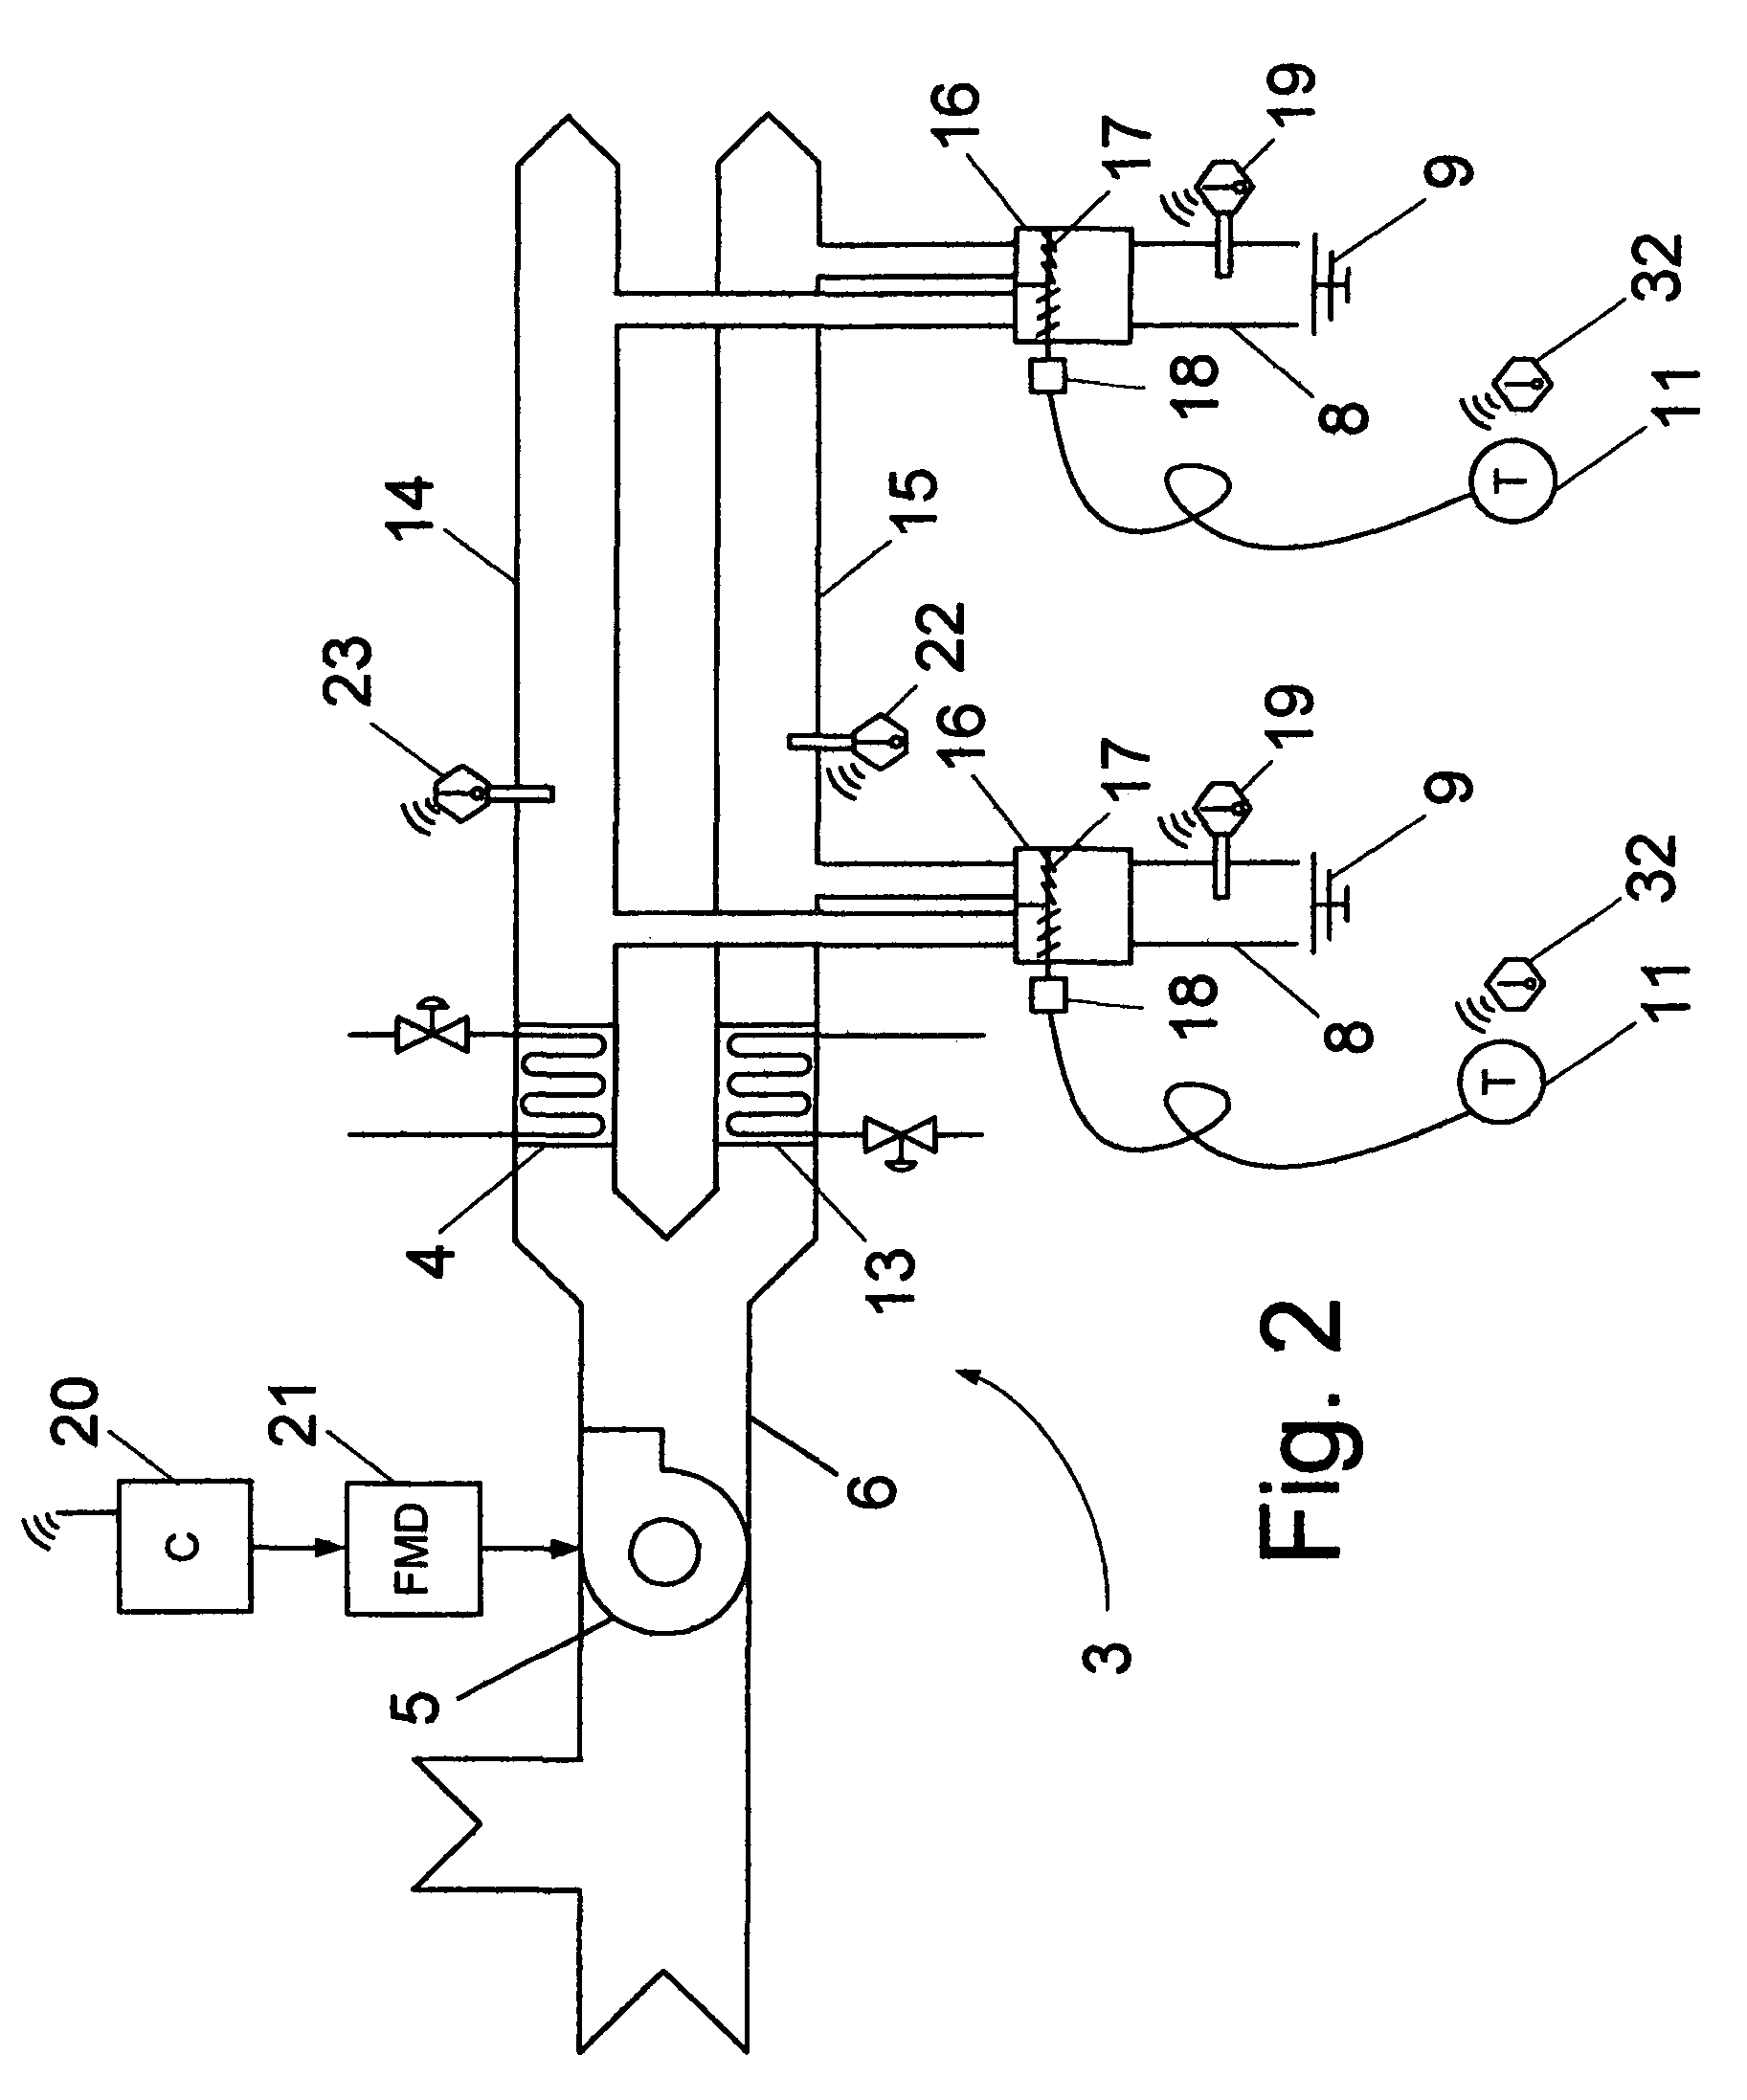 Method and apparatus for converting constant-volume supply fans to variable flow operation